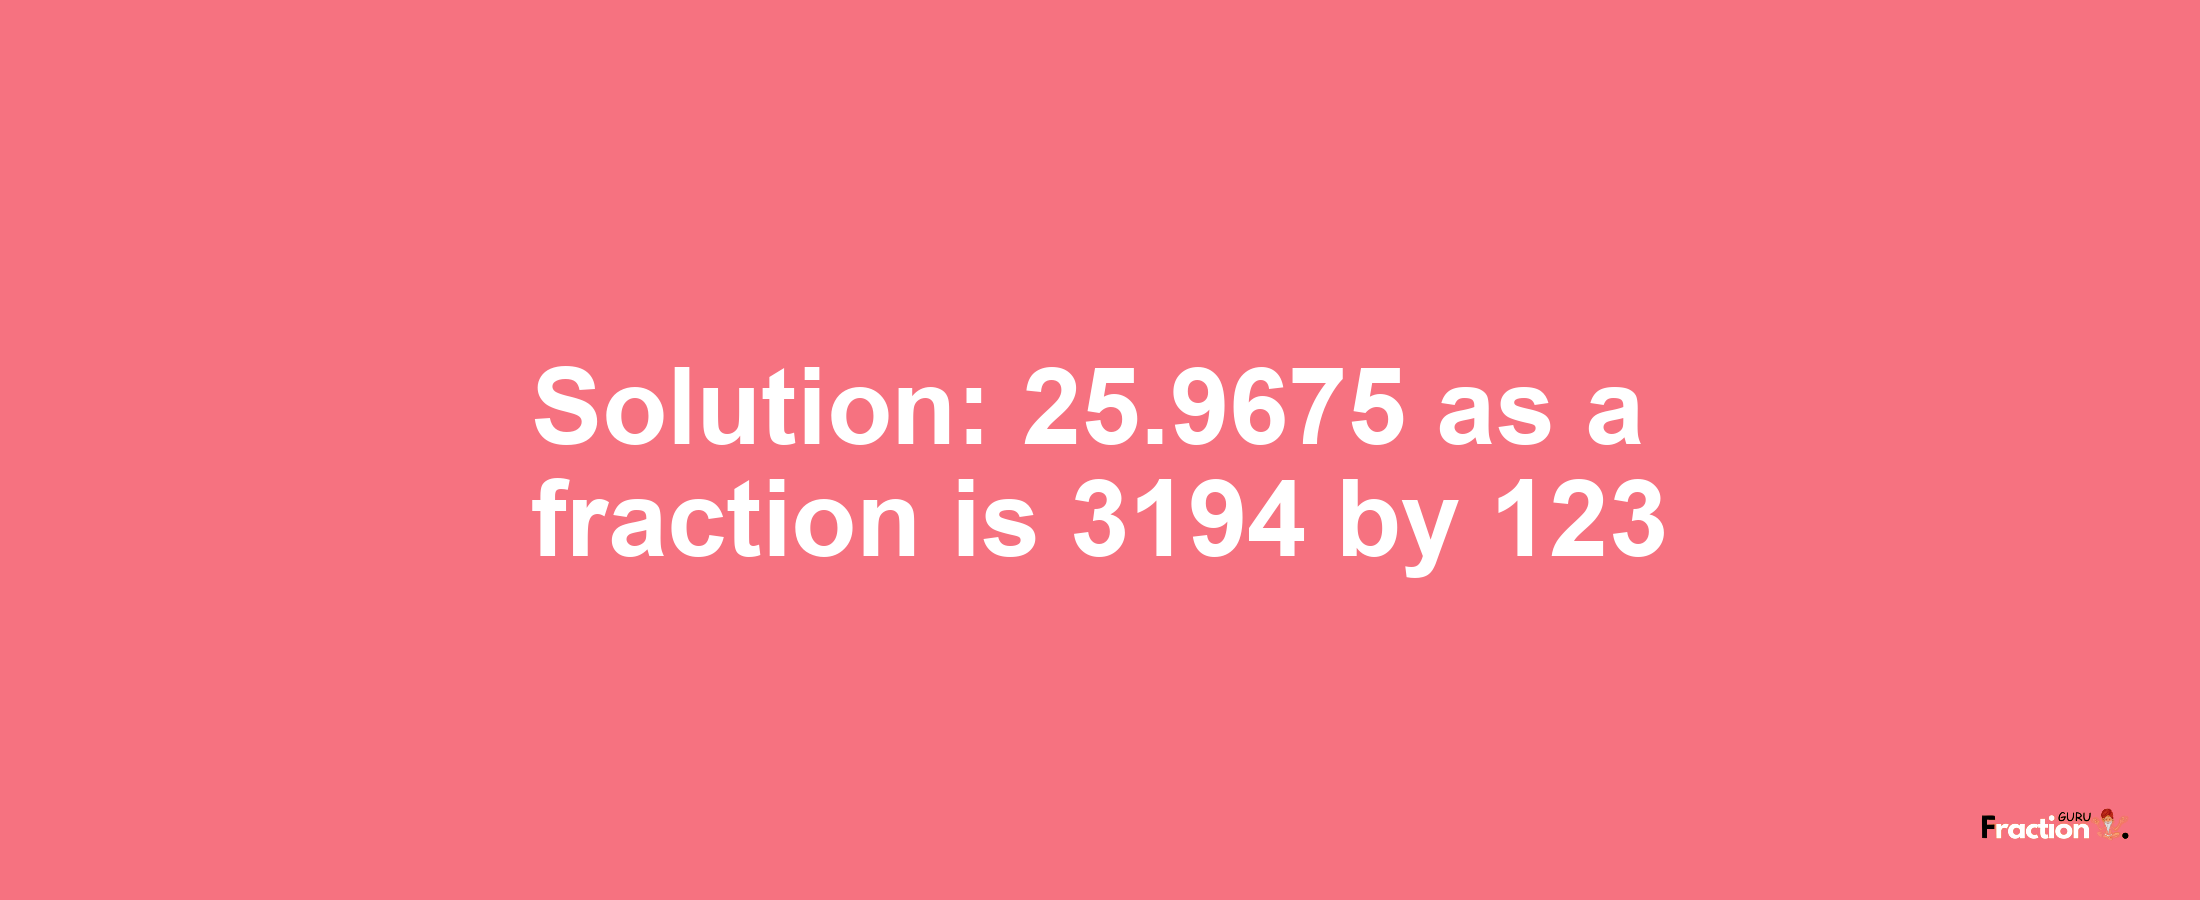 Solution:25.9675 as a fraction is 3194/123